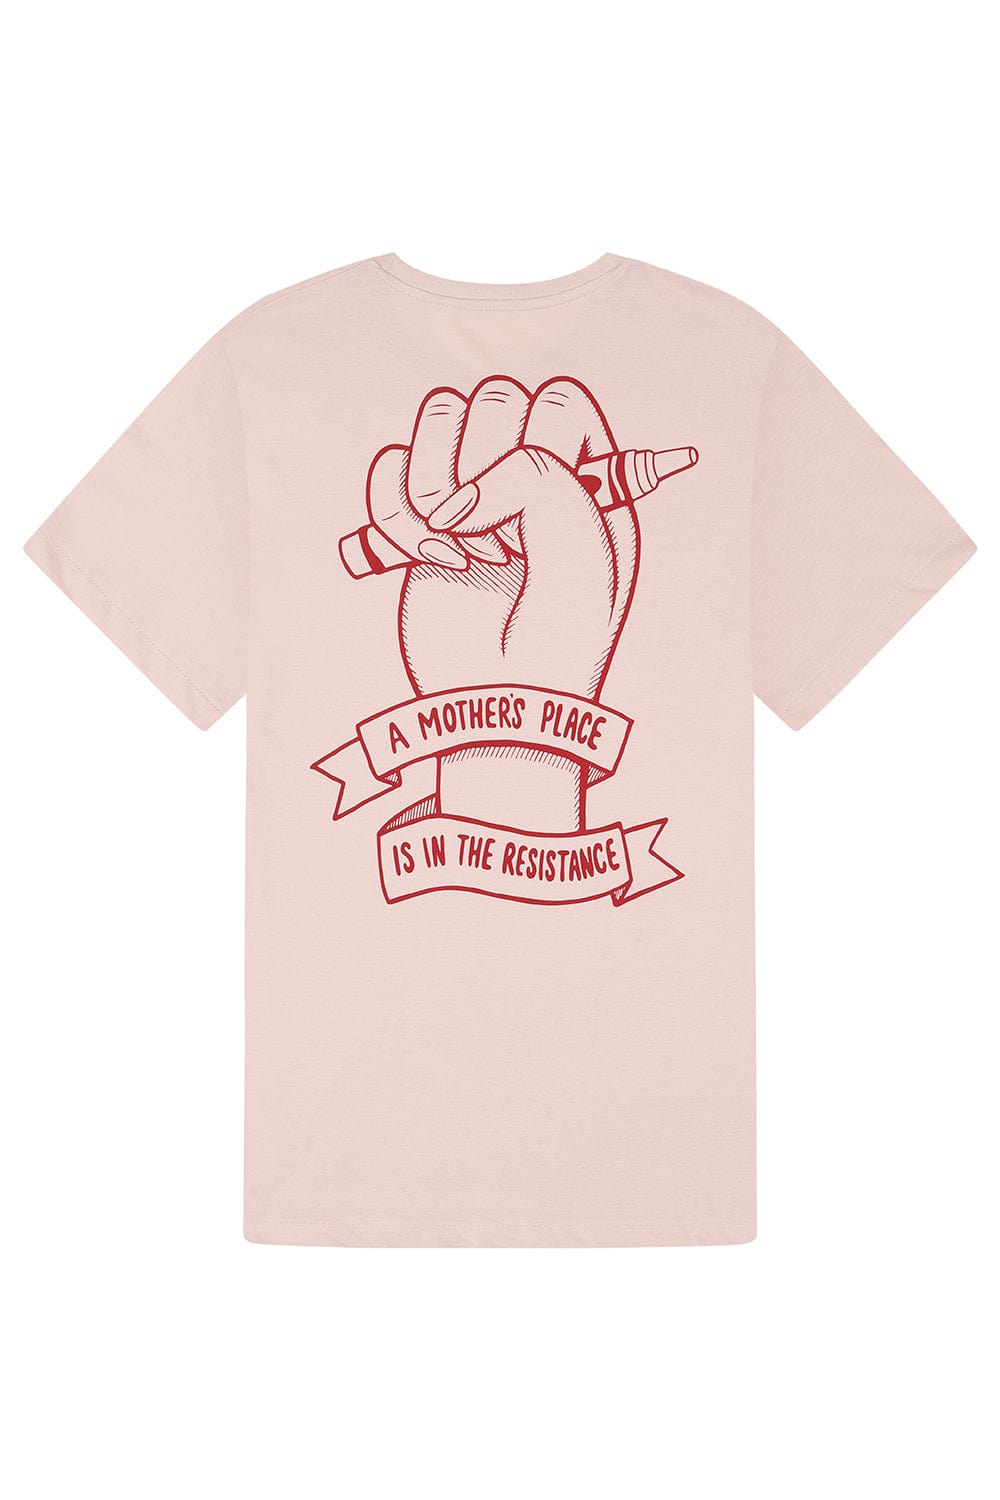 A Mother's Place is in the Resistance Dusky Pink T-Shirt T-shirts Black & Beech